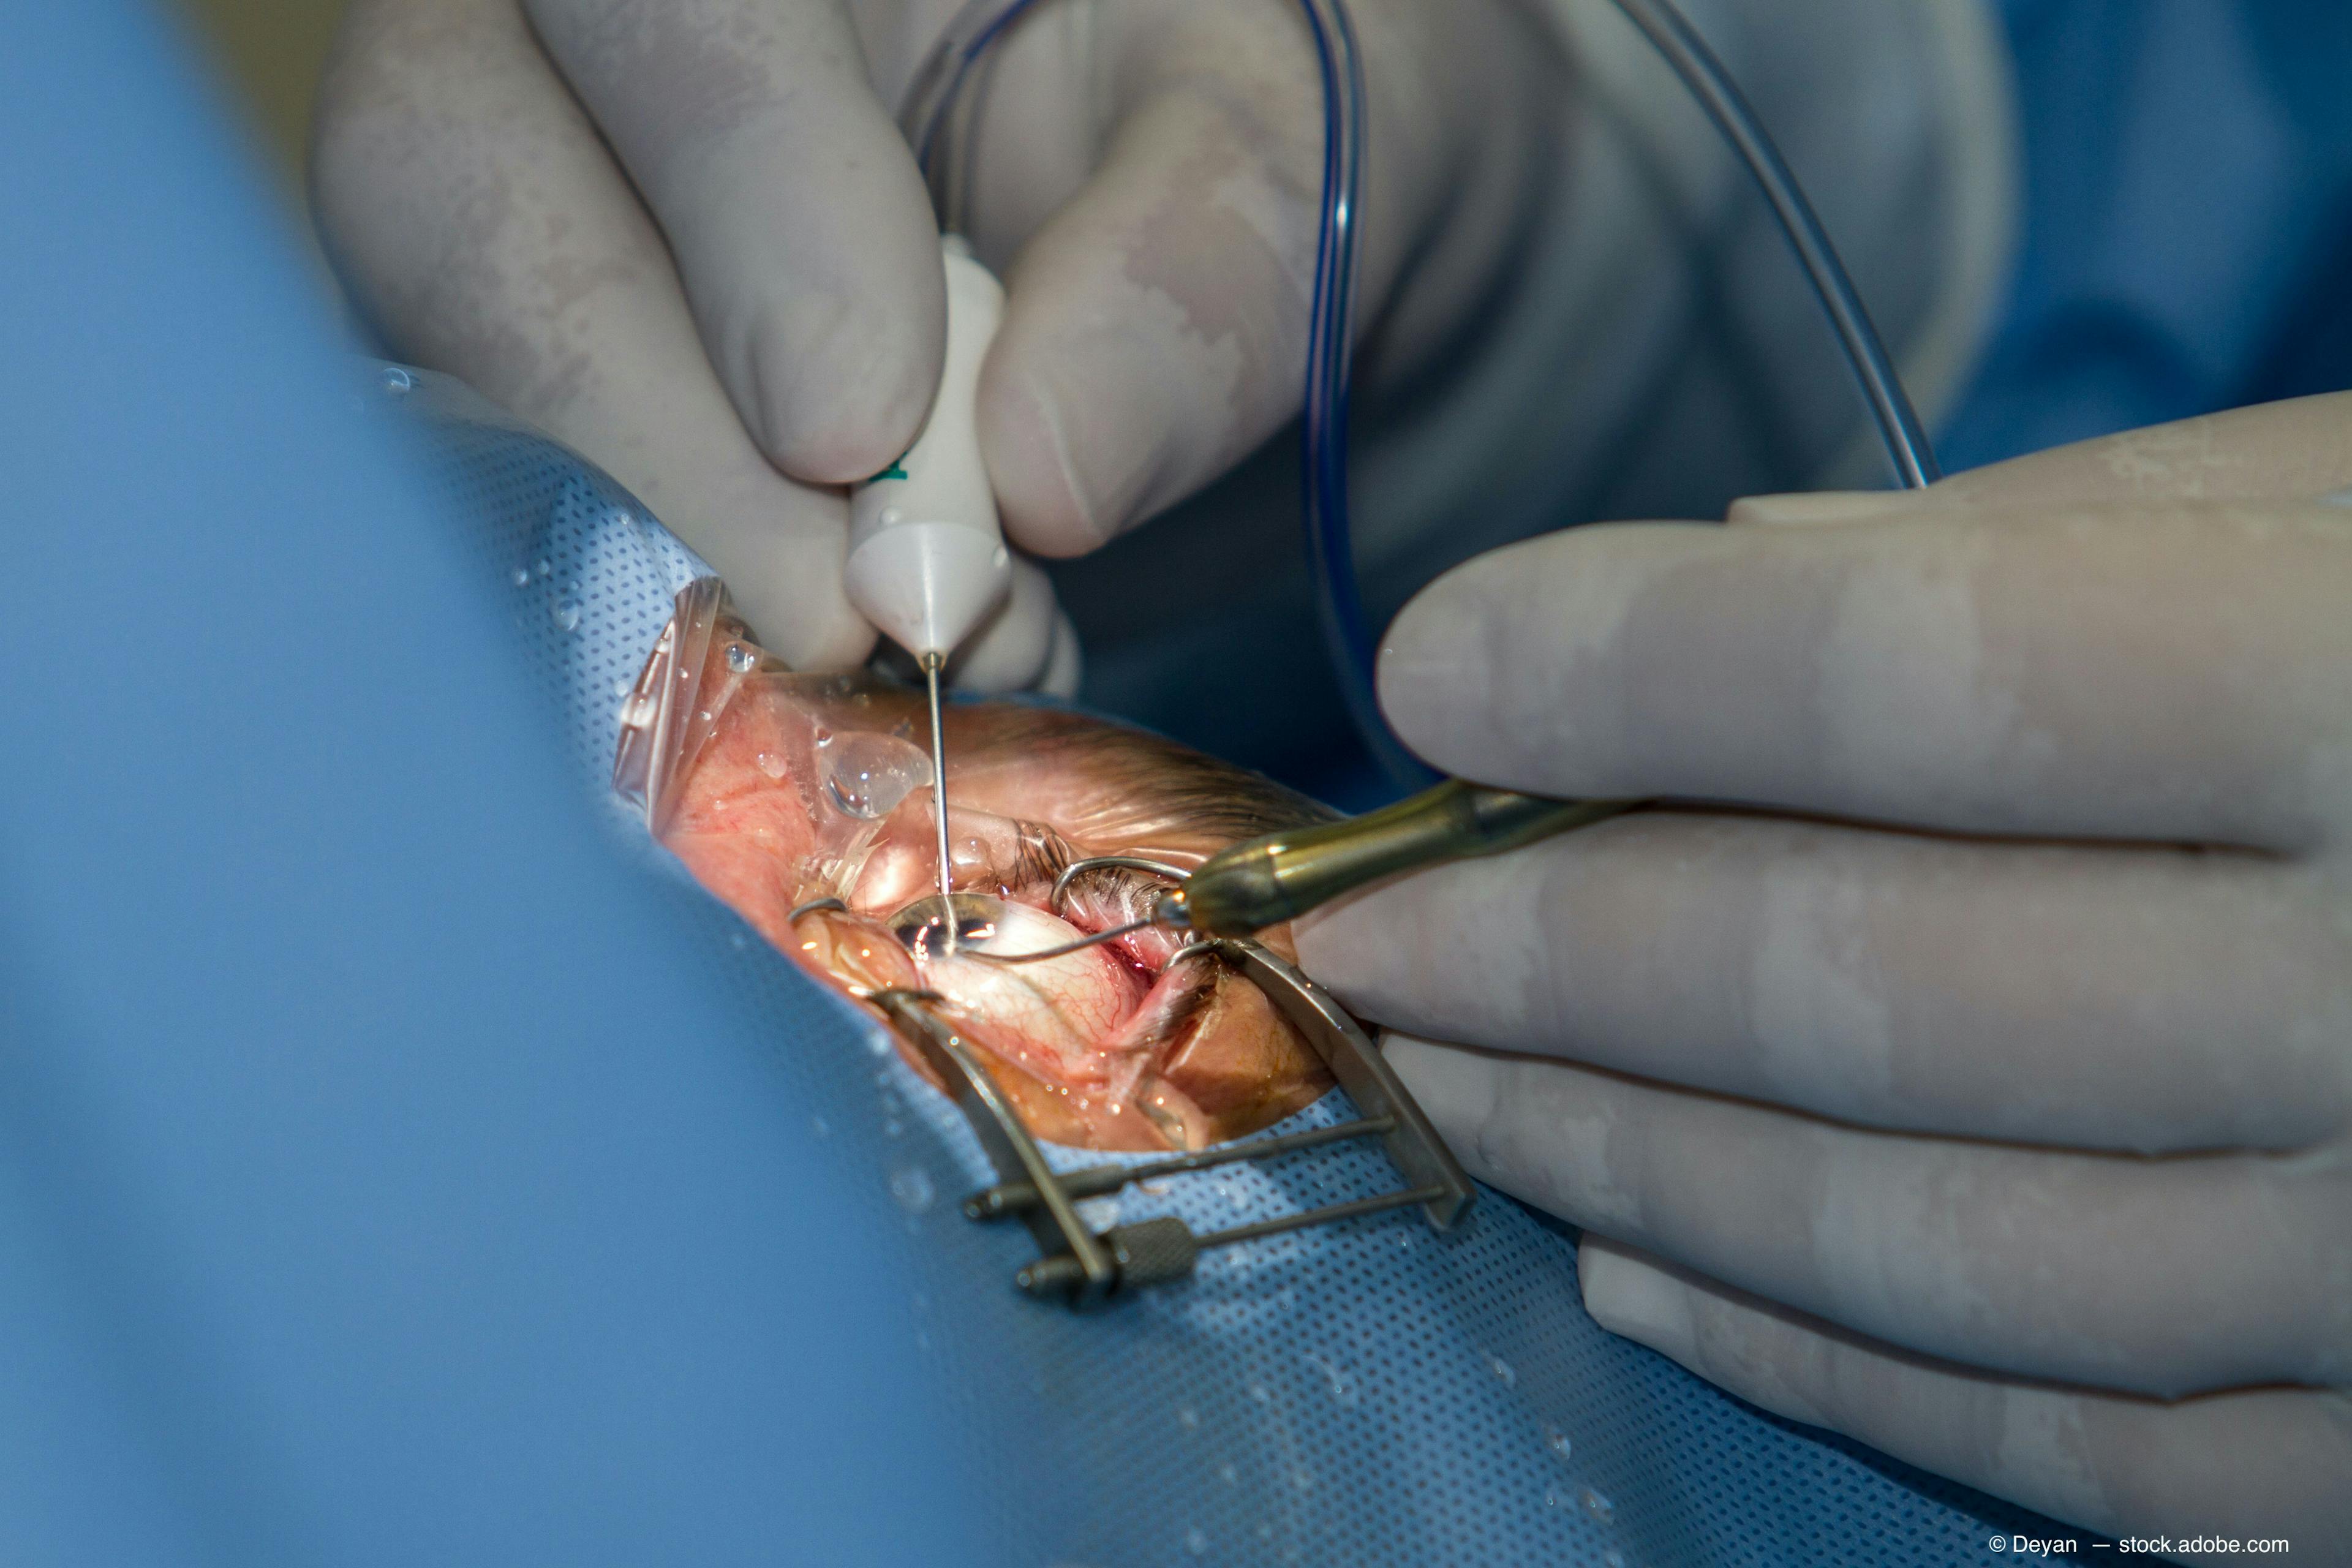 Intravitreal implant offers anatomic, visual improvement